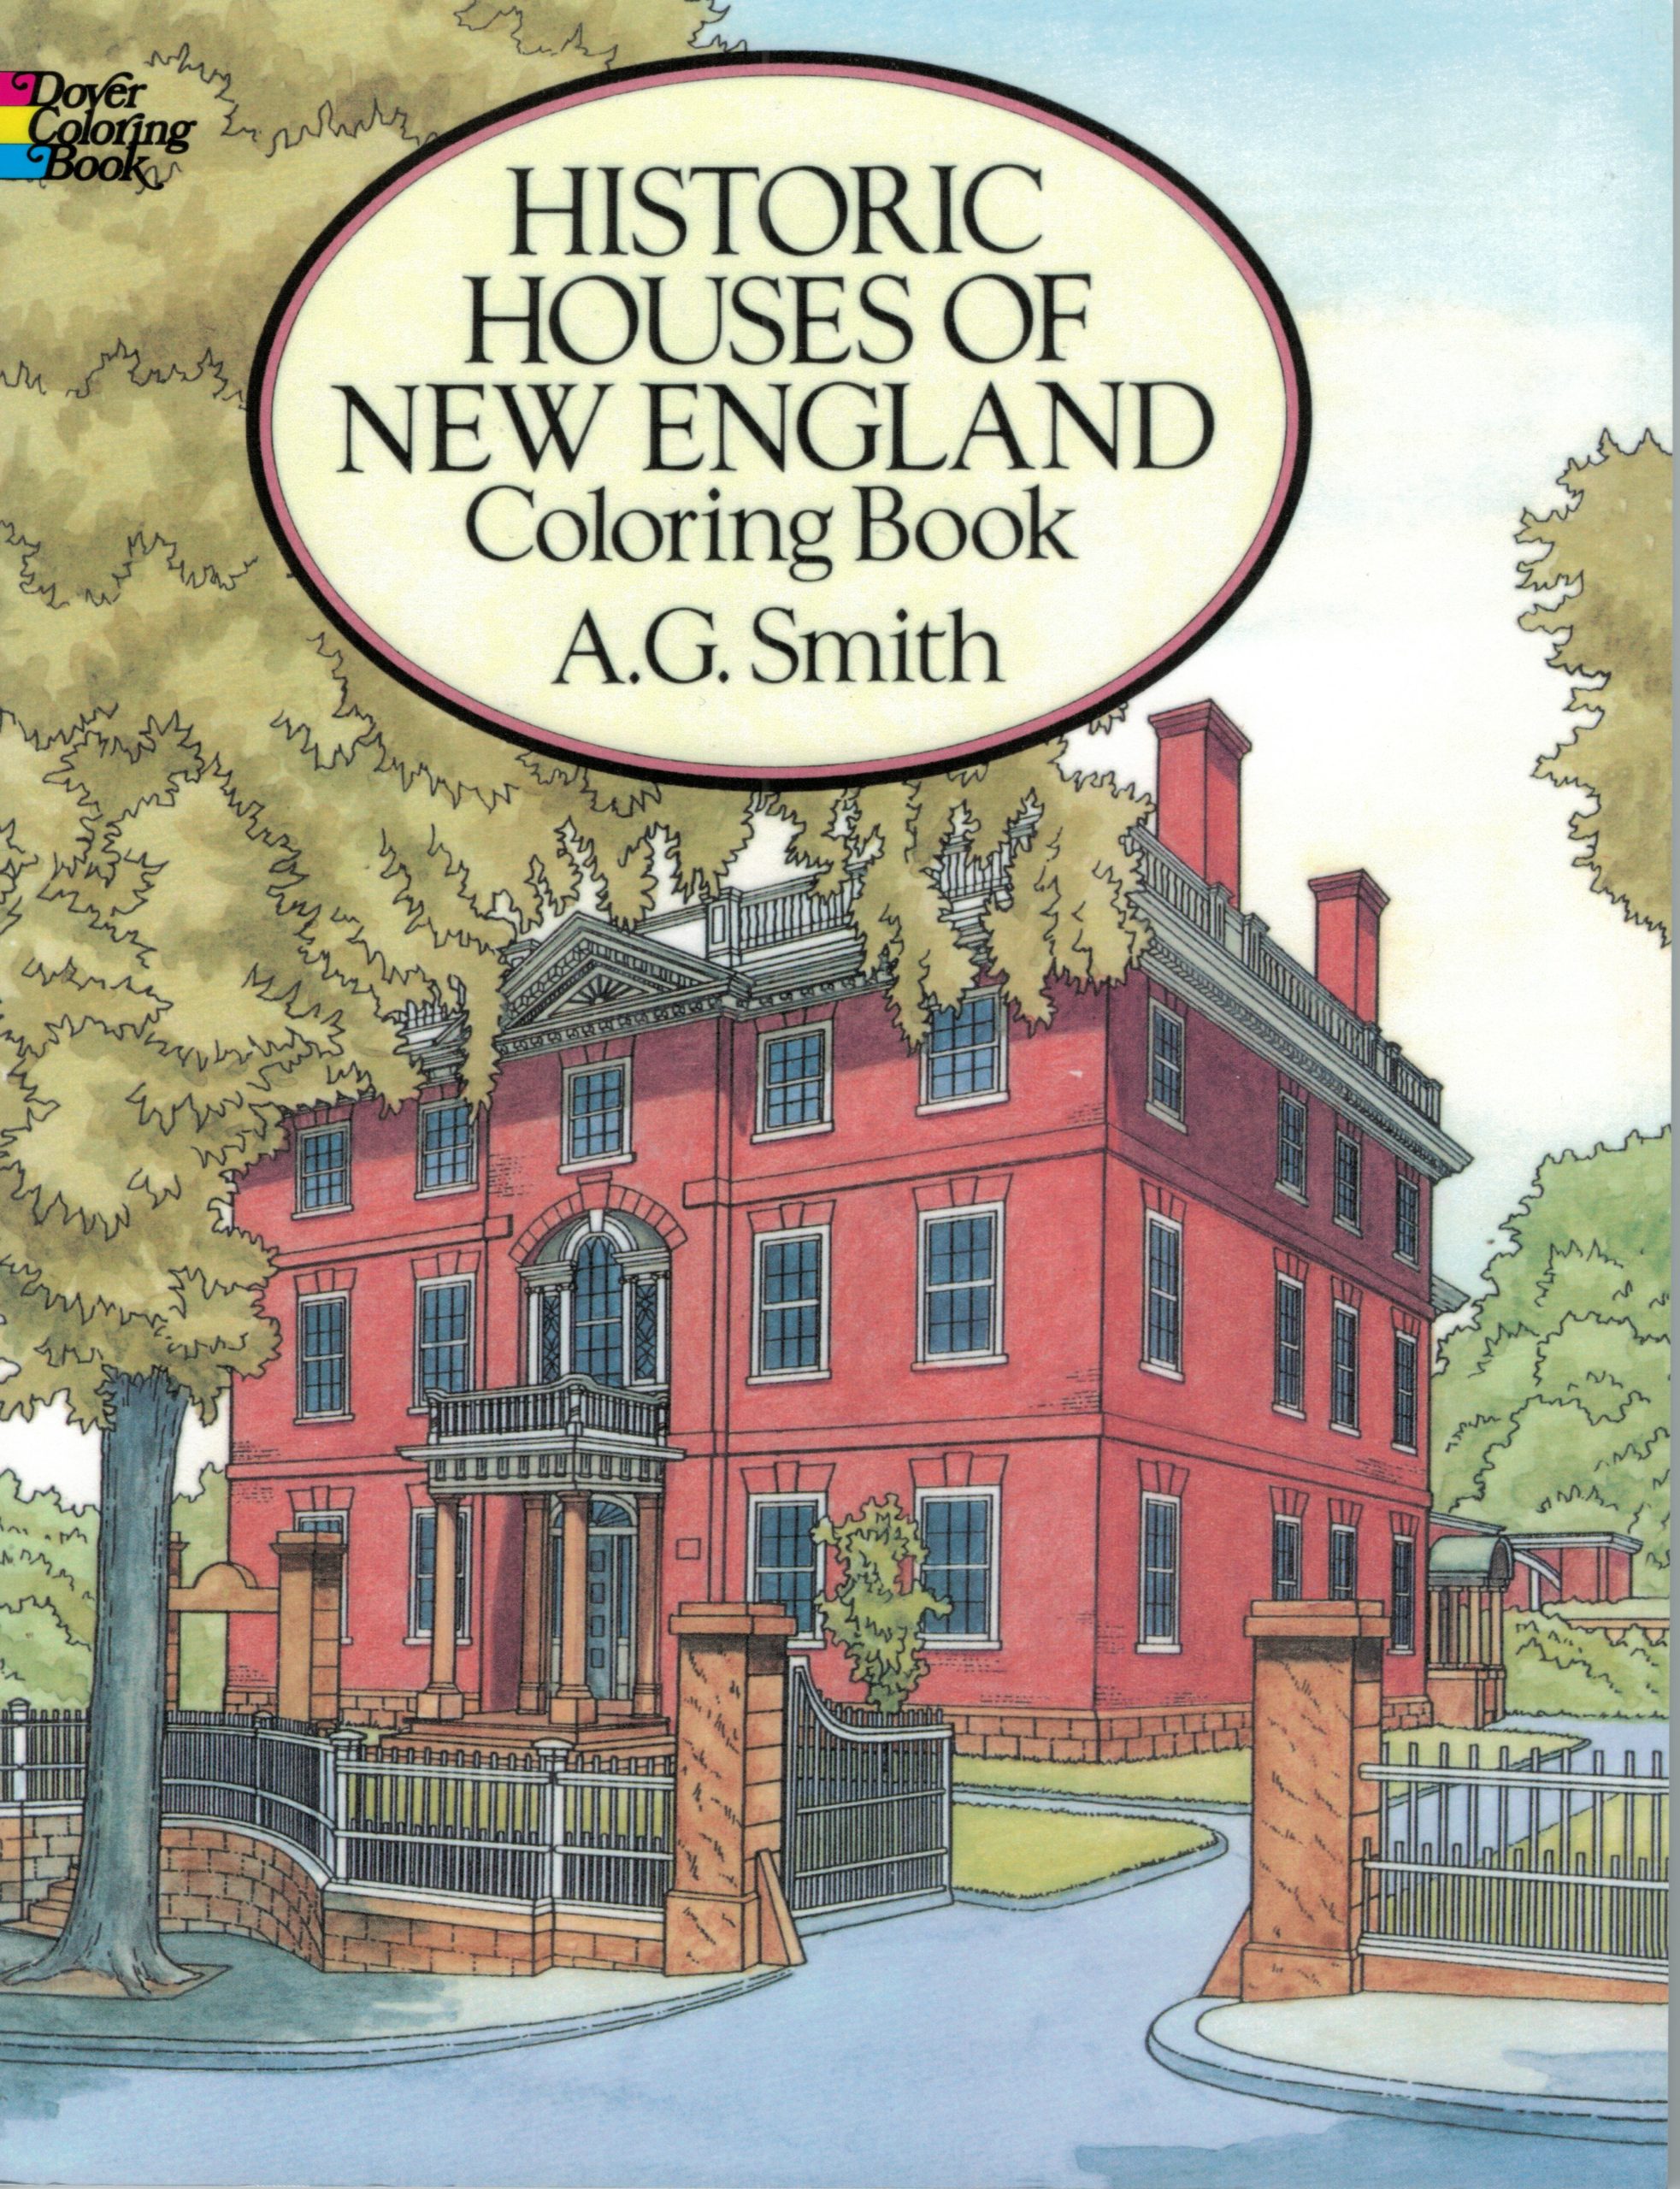 Historic houses of new england coloring book